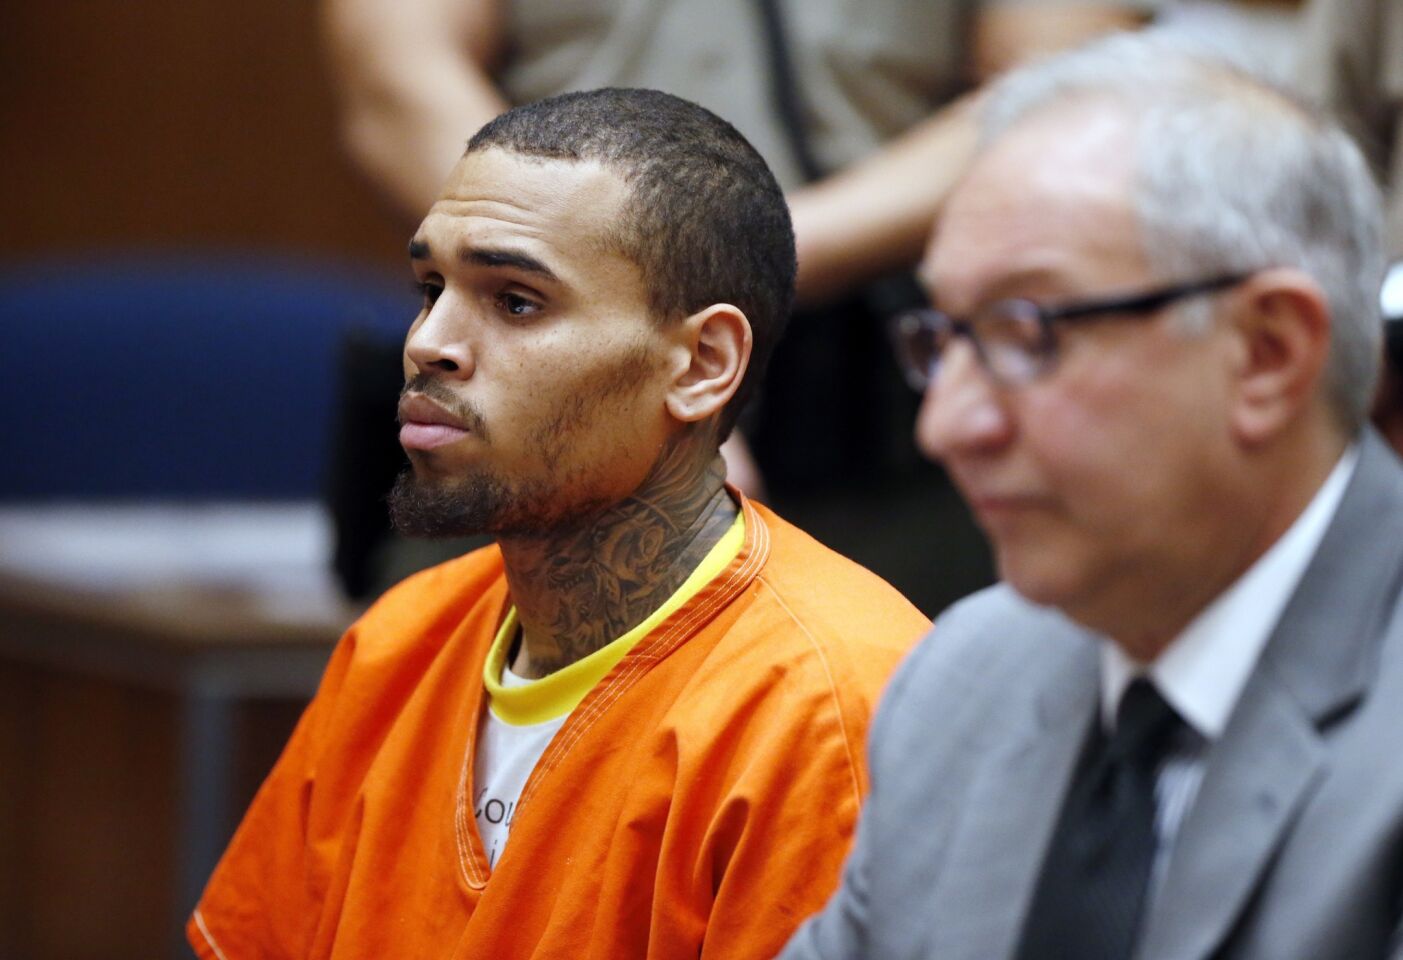 Chris brown arrested after altercation in washington dc